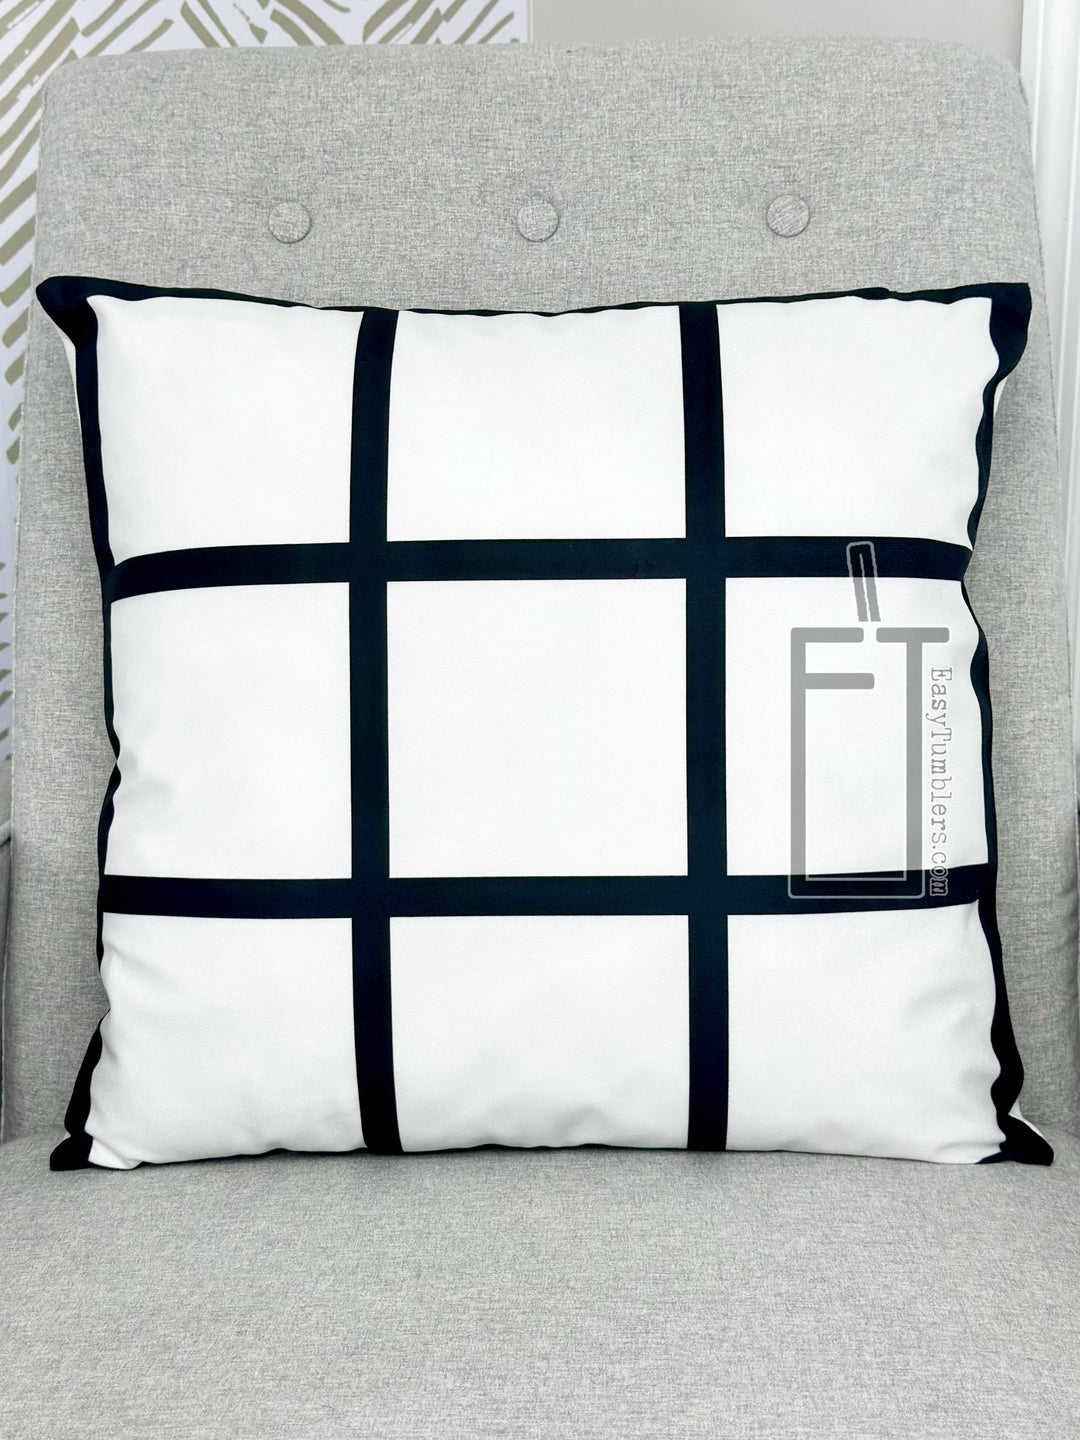 Throw Pillow Covers, Sublimation Pillow Covers, Pillow Covers